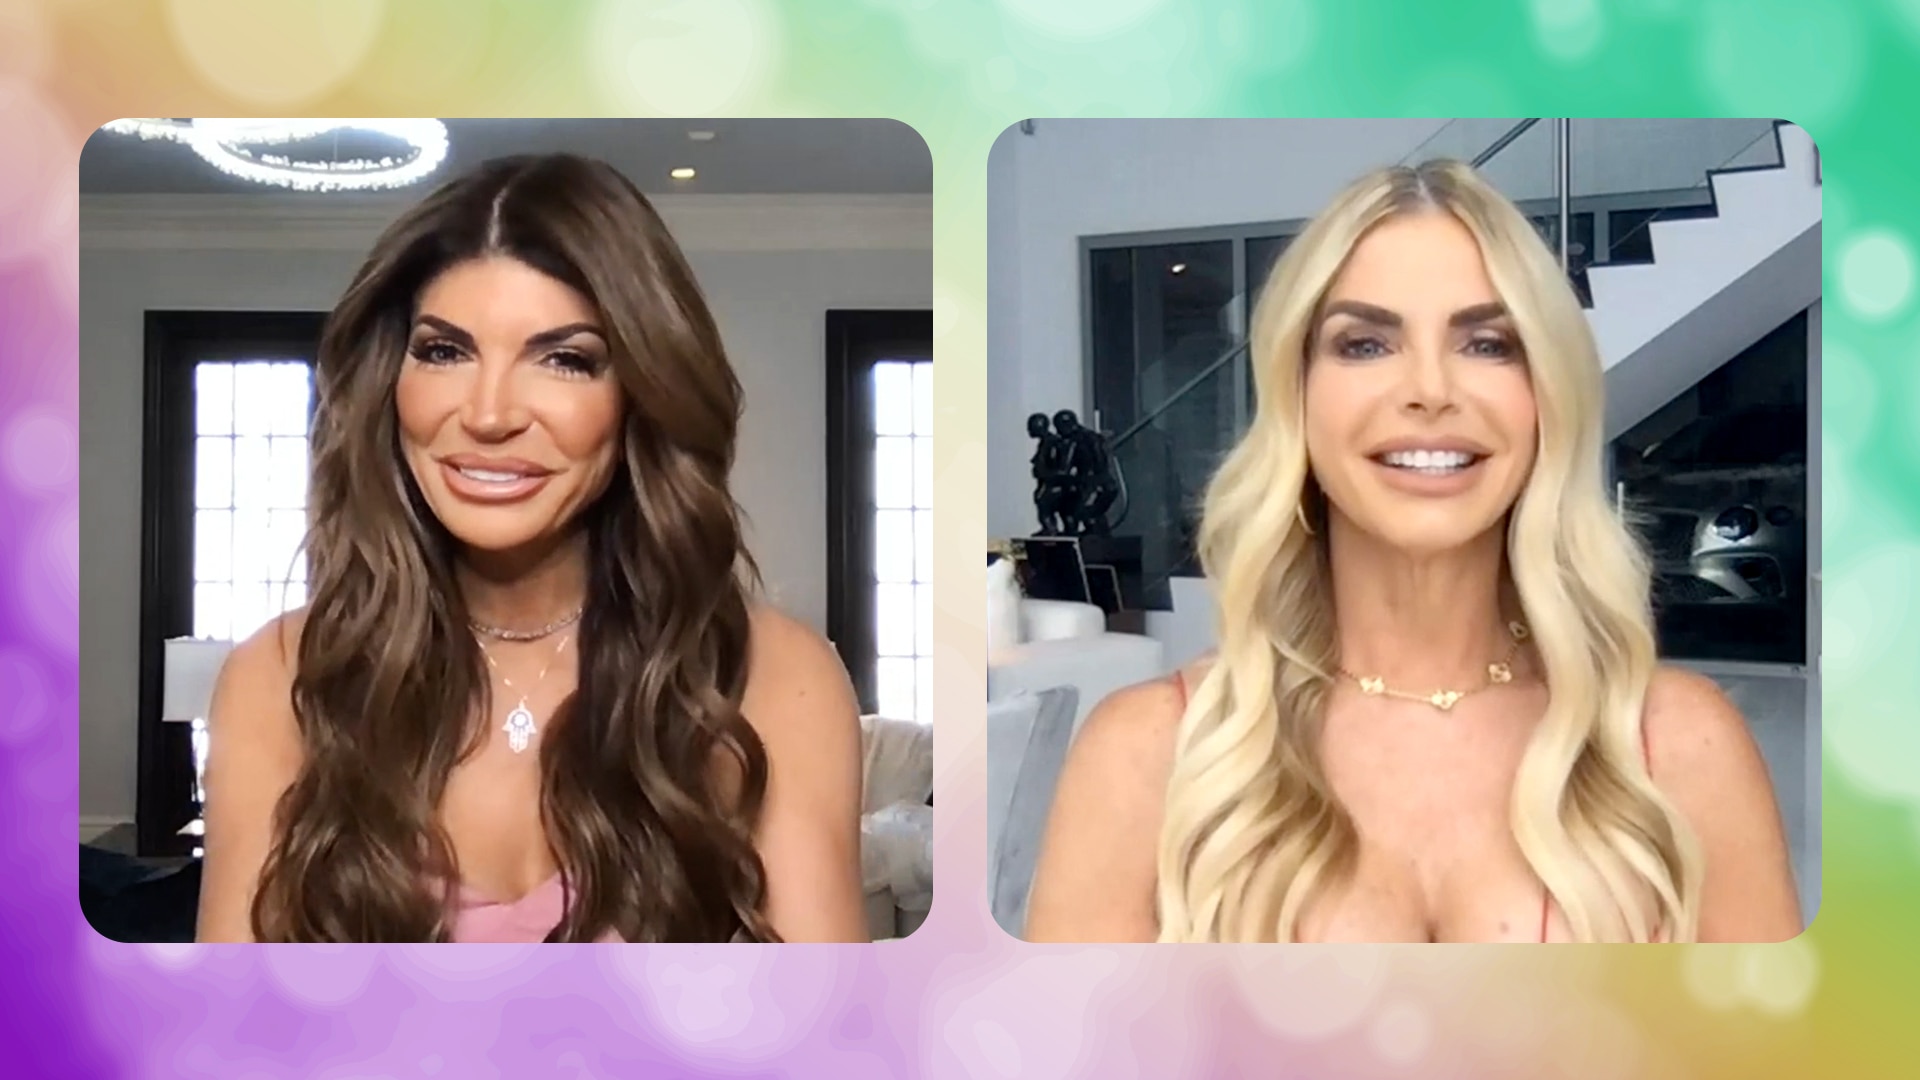 Teresa Giudice and Alexia Echevarria Reflect on "Adversity and Challenges": "We Have a Lot in Common"